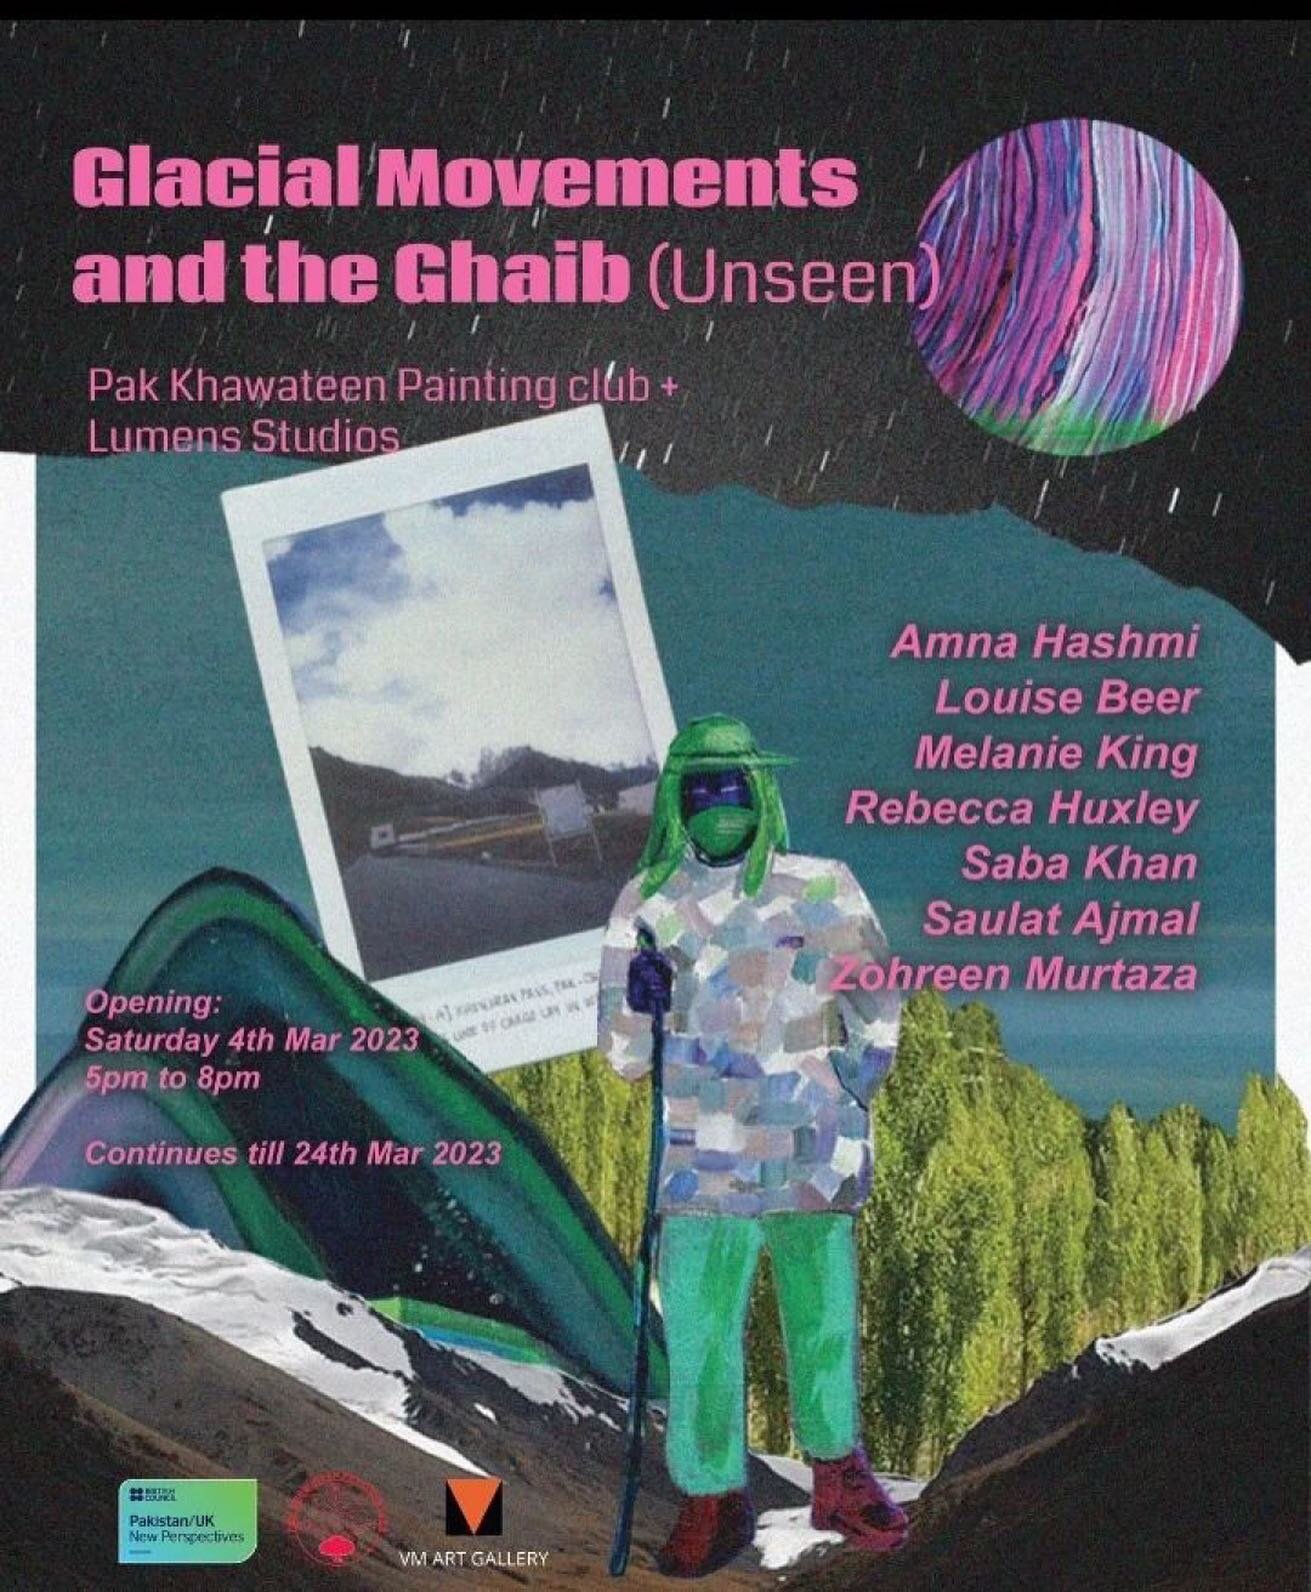 Lumen Studios and the Pak Khawateen Painting Club present &ldquo;Glacial Movements and the Ghaib (Unseen)&rdquo; at VM Art Gallery, Karachi, Pakistan.

This exhibition explores the history and politics of water bodies, flow of water, fluidity, bodies